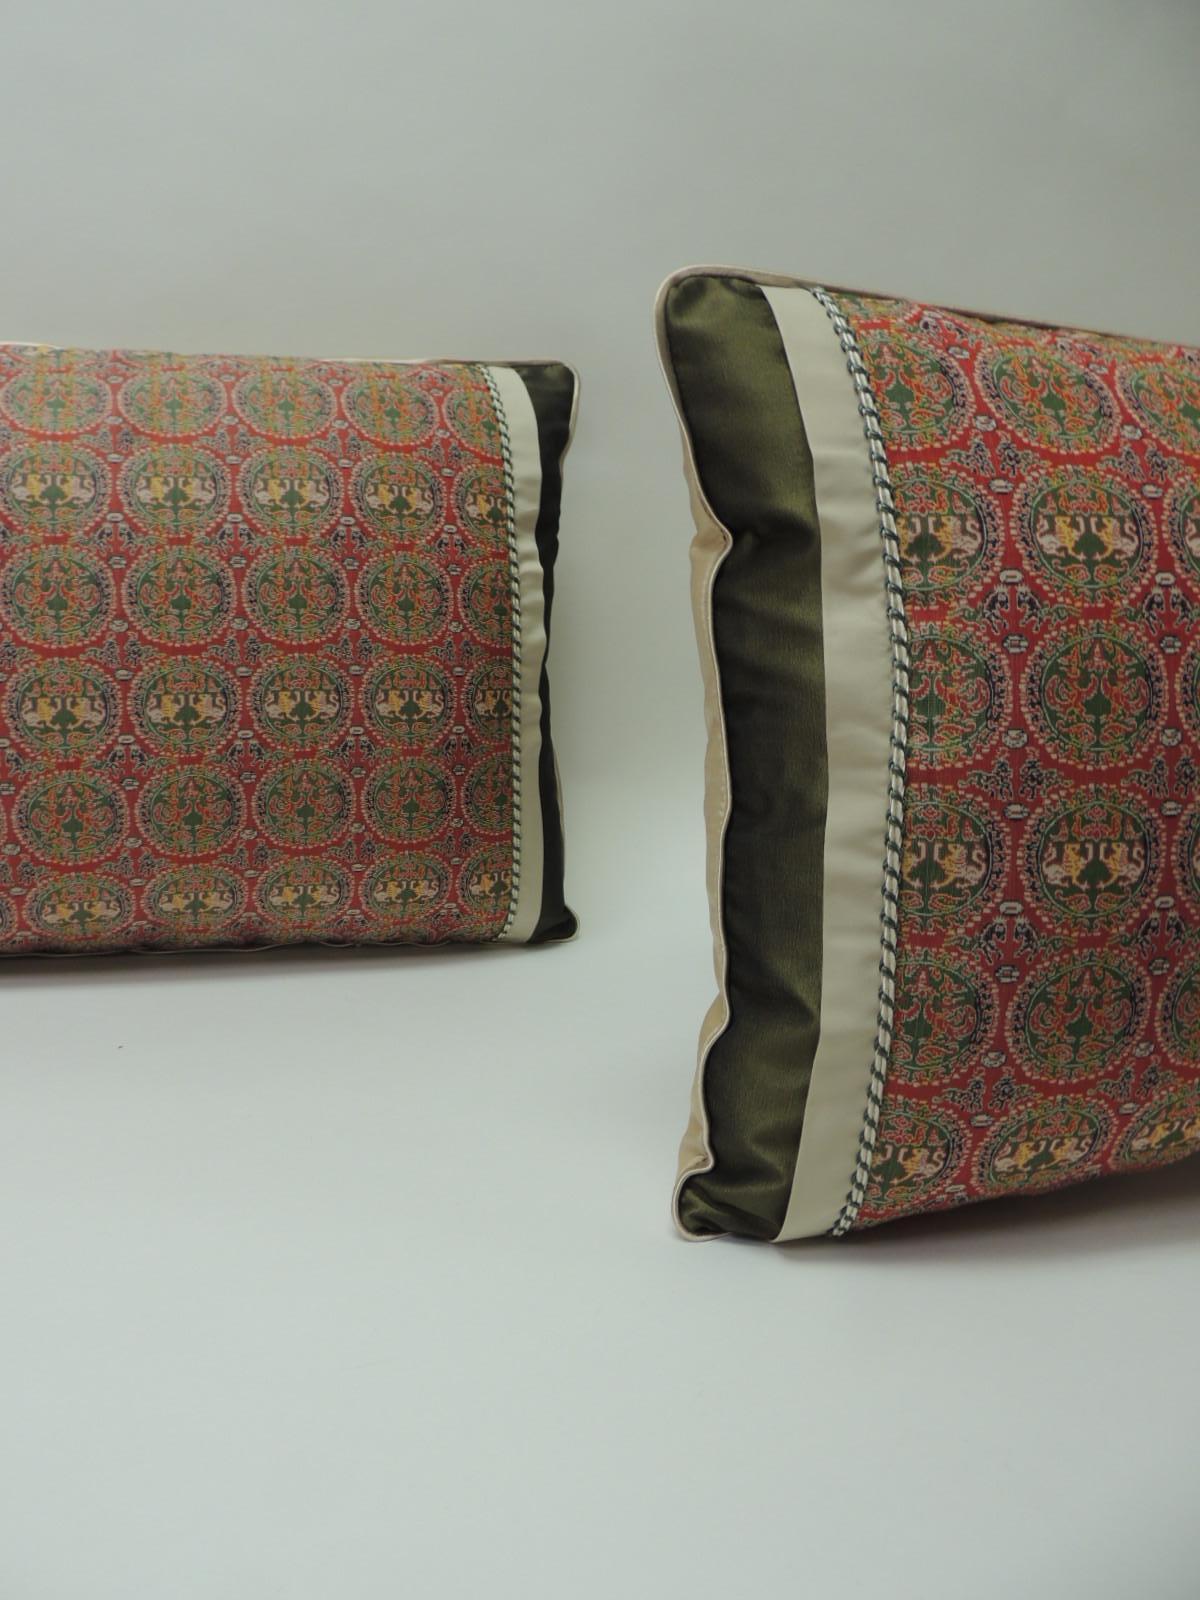 Mid-20th Century Brocade with Circular Design of Tigers and Phoenixes Bolster Decorative Pillow